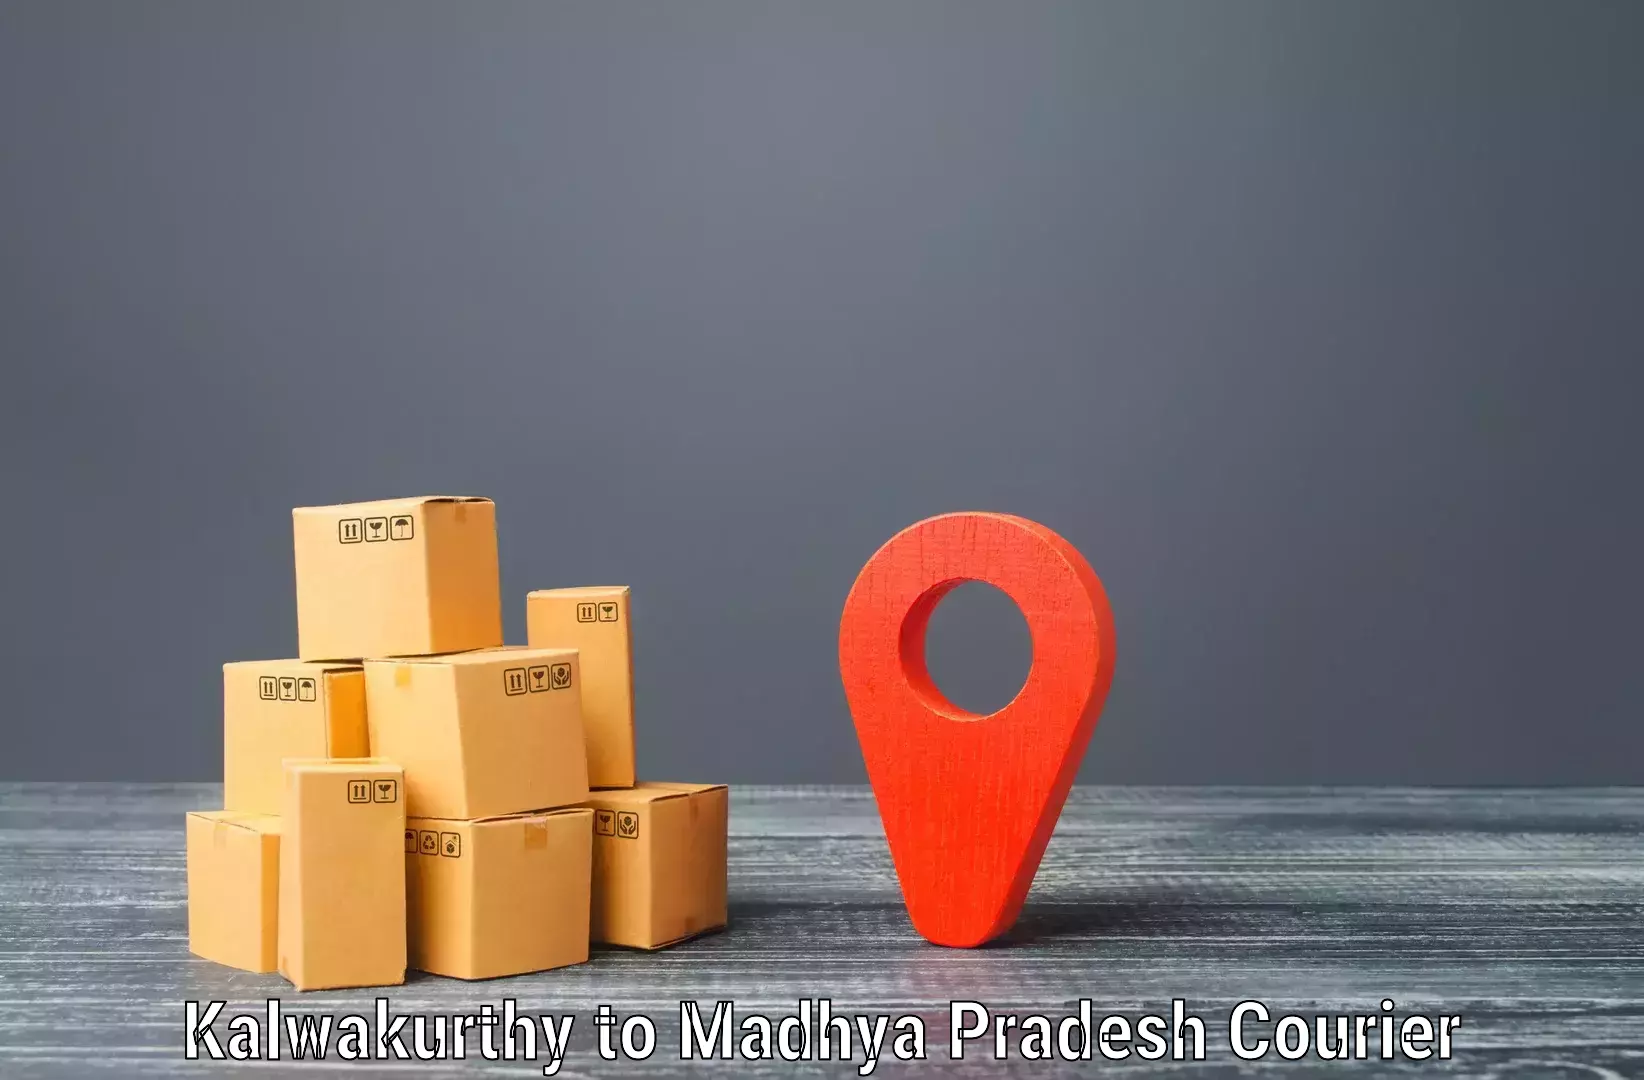 Cost-effective courier options Kalwakurthy to Mandla